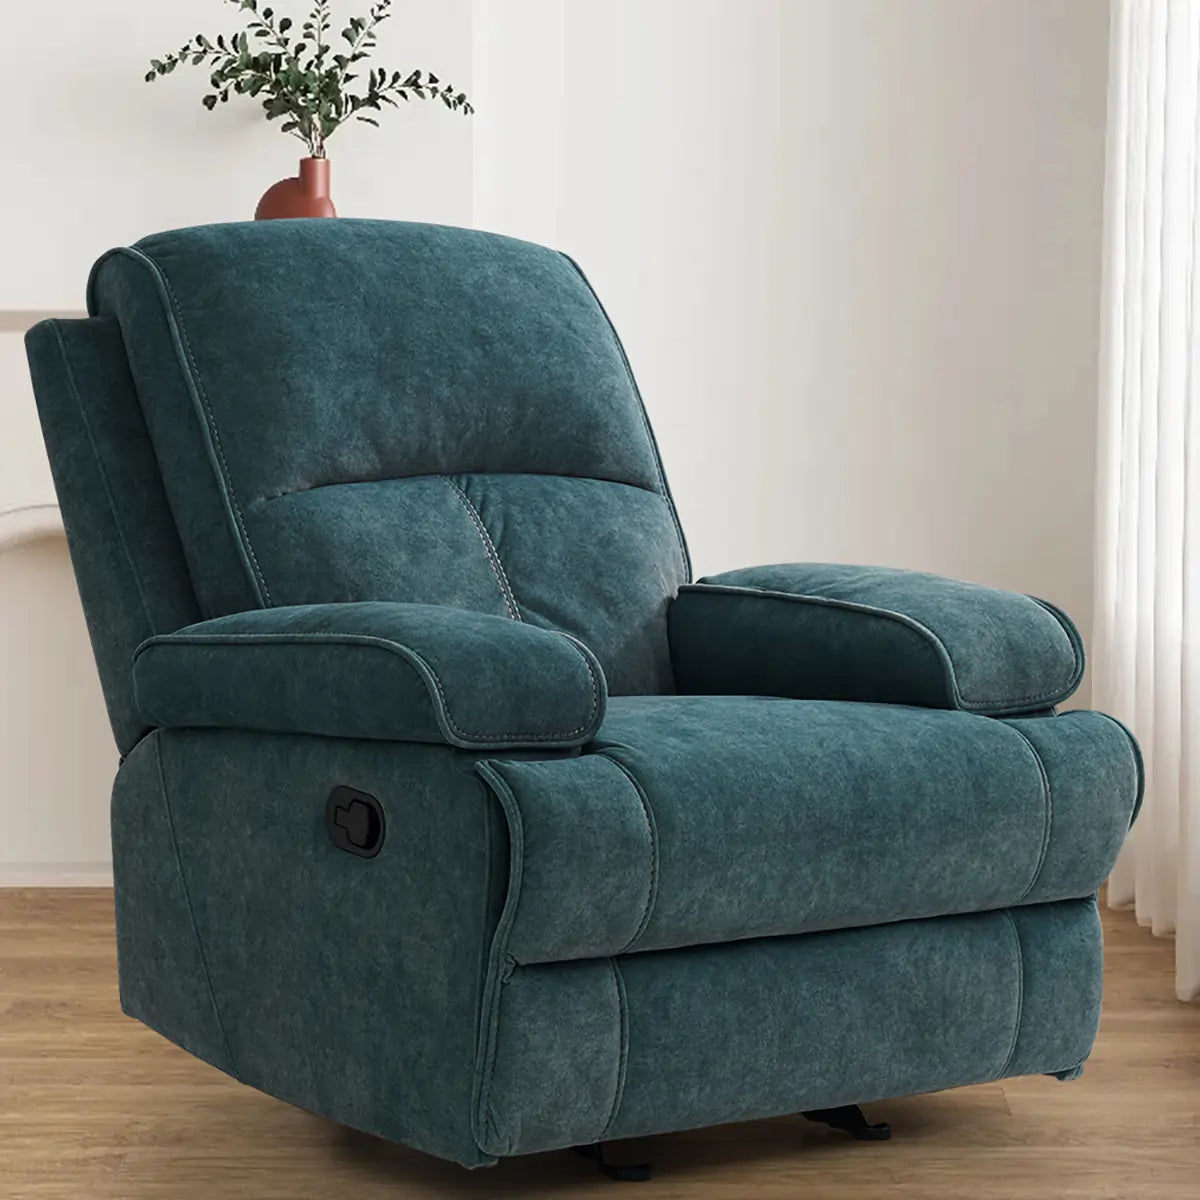 Manual Rocking Recliner Nursery Gliders, Breathable Fabric blue